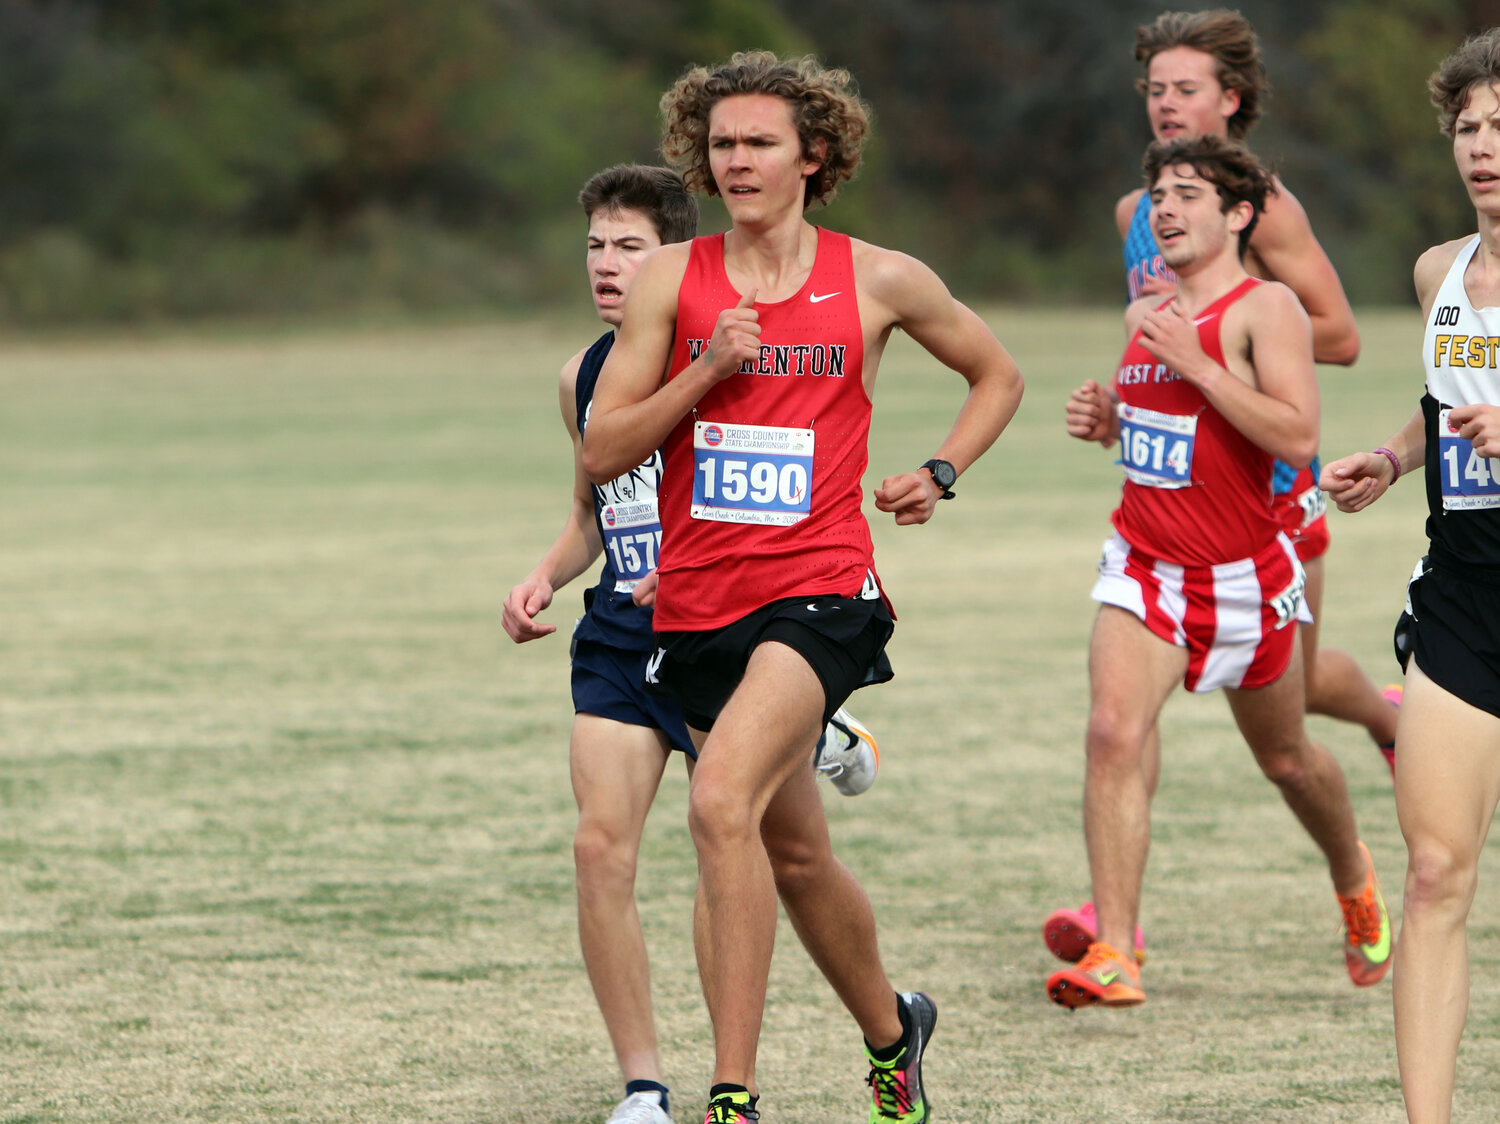 Warrenton senior Wyatt Claiborne leads a pack of runners during the Class 4 race.